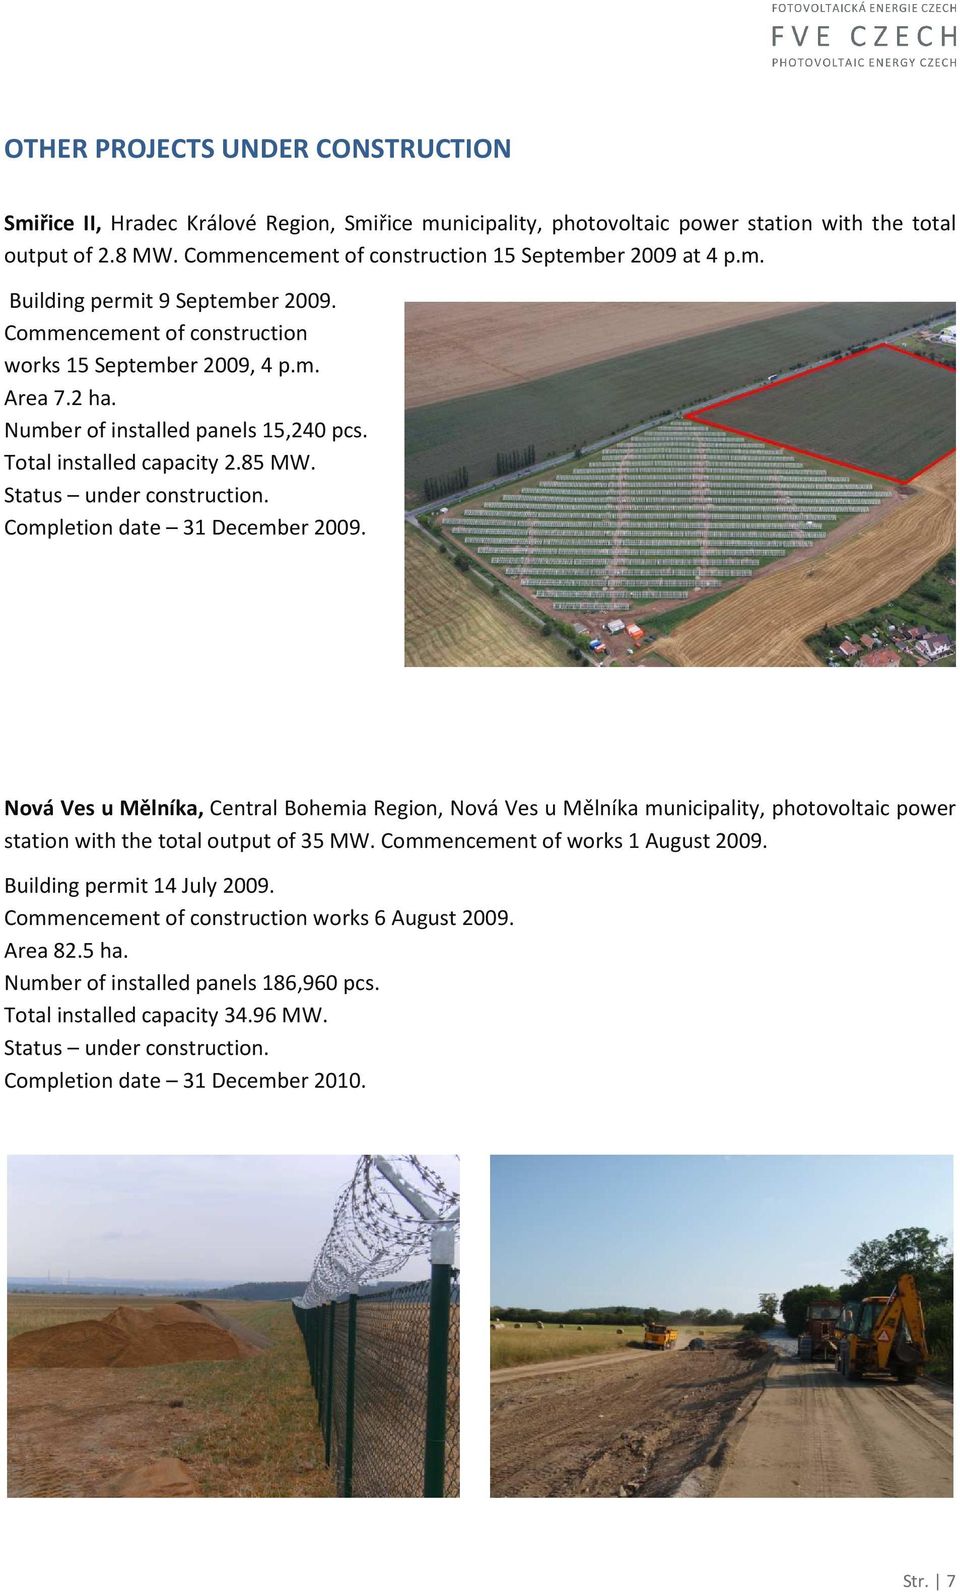 Number of installed panels 15,240 pcs. Total installed capacity 2.85 MW. Status under construction. Completion date 31 December 2009.